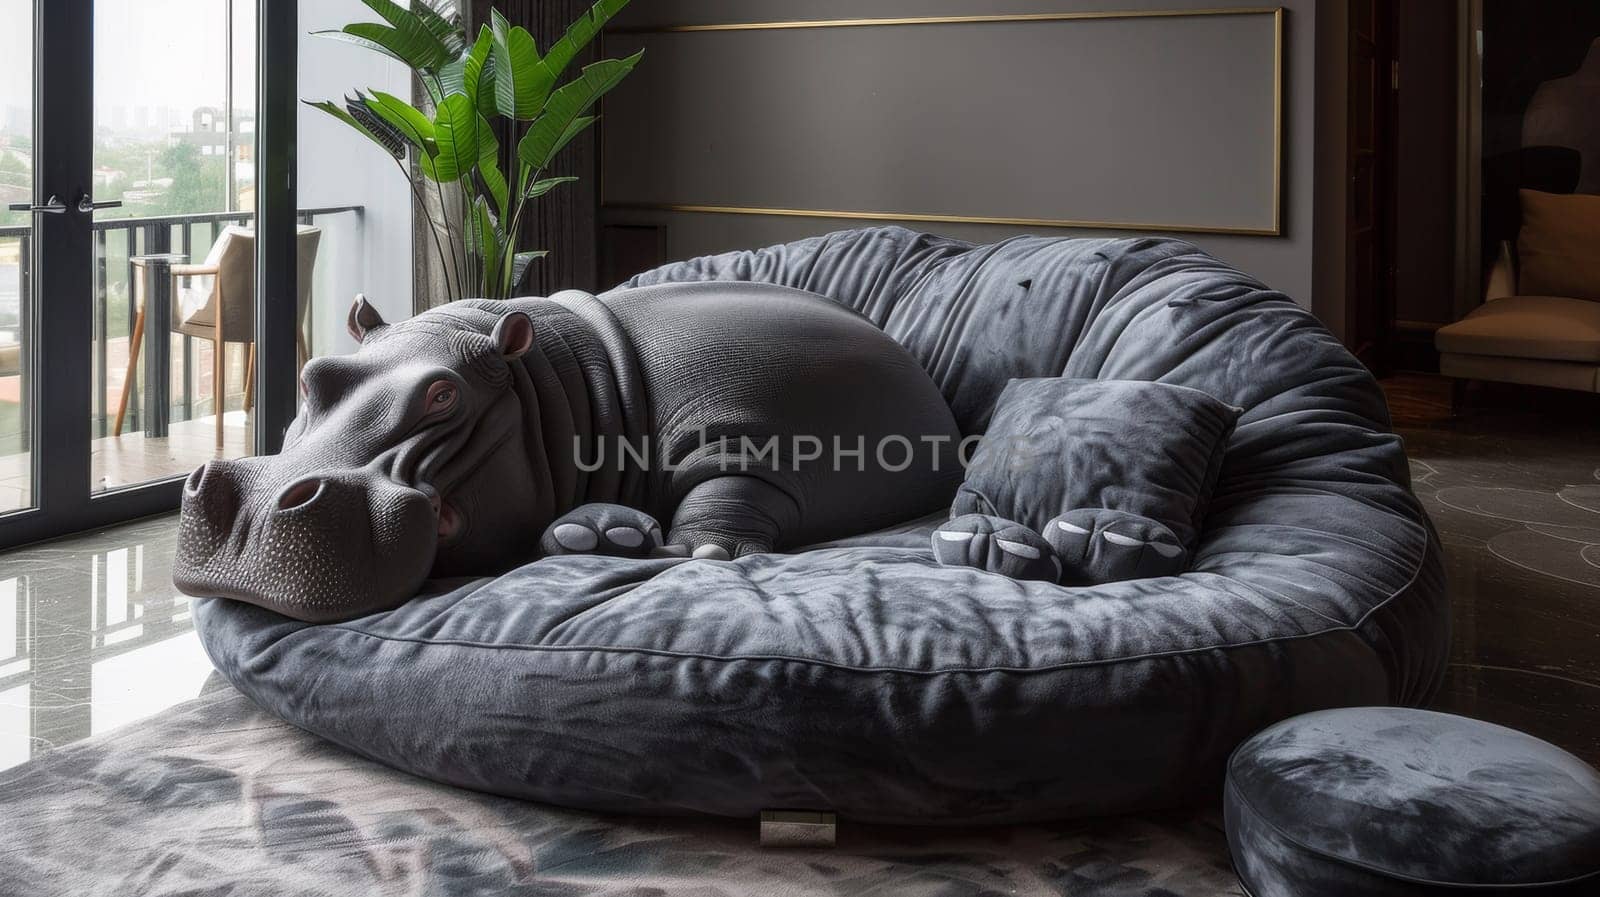 A hippo shaped bean bag chair sitting in front of a window, AI by starush